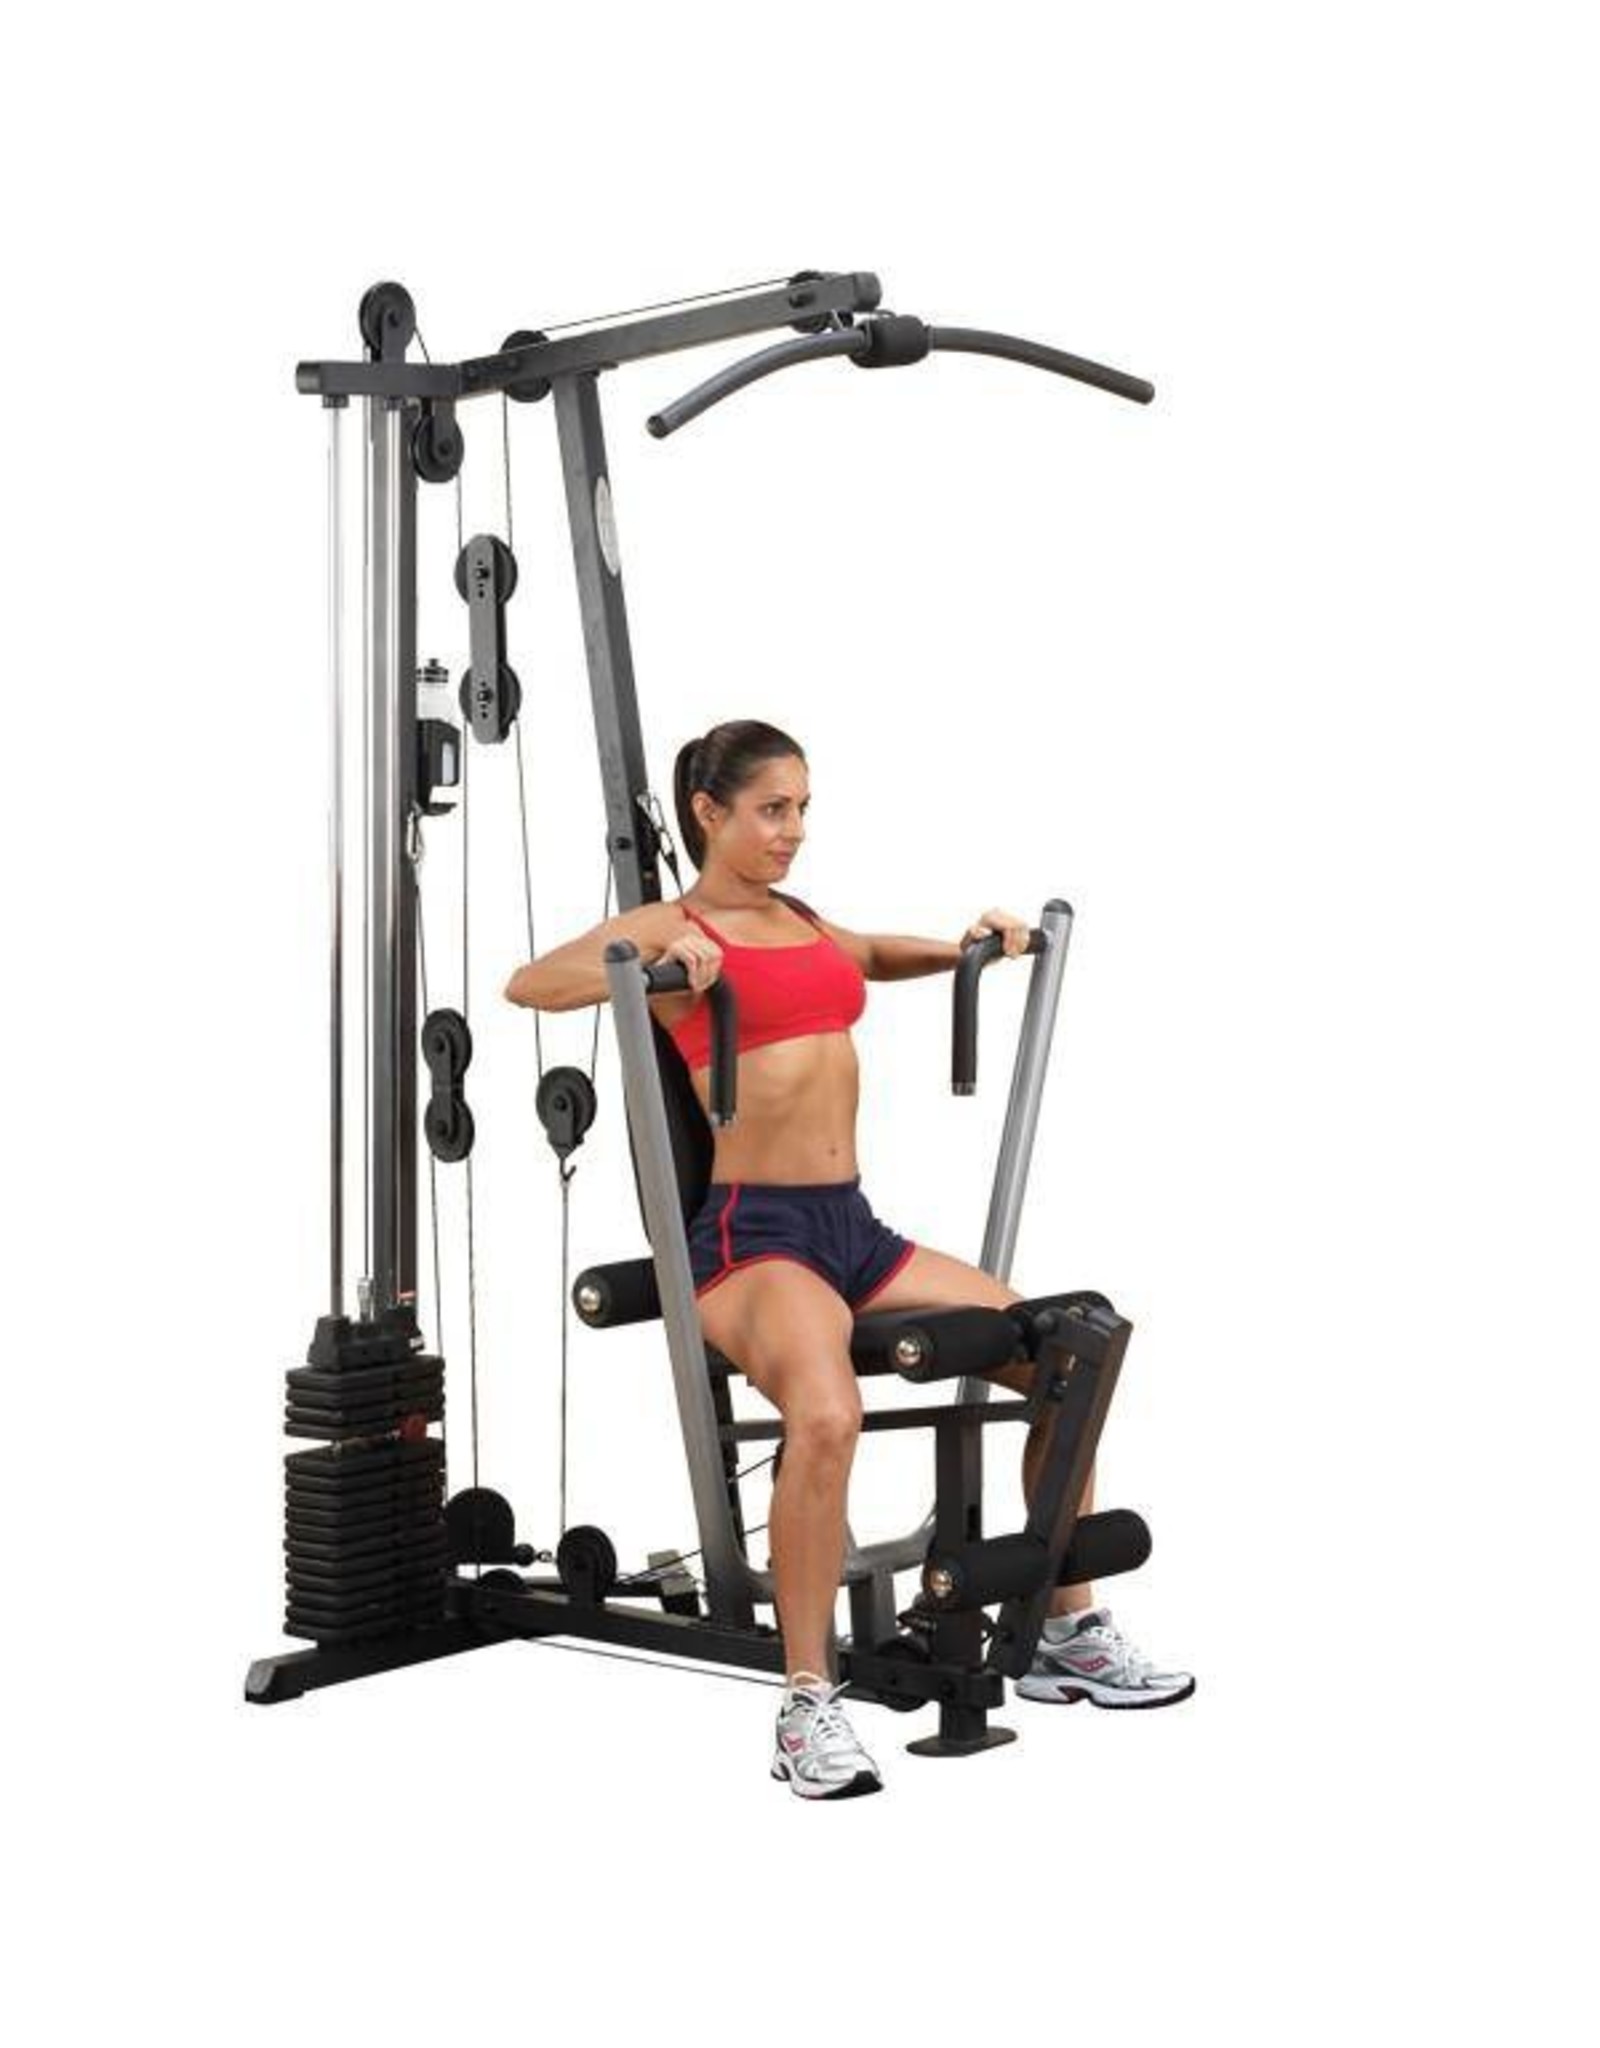 Body-Solid Body-Solid Basic Multi-functionele Gym G1S